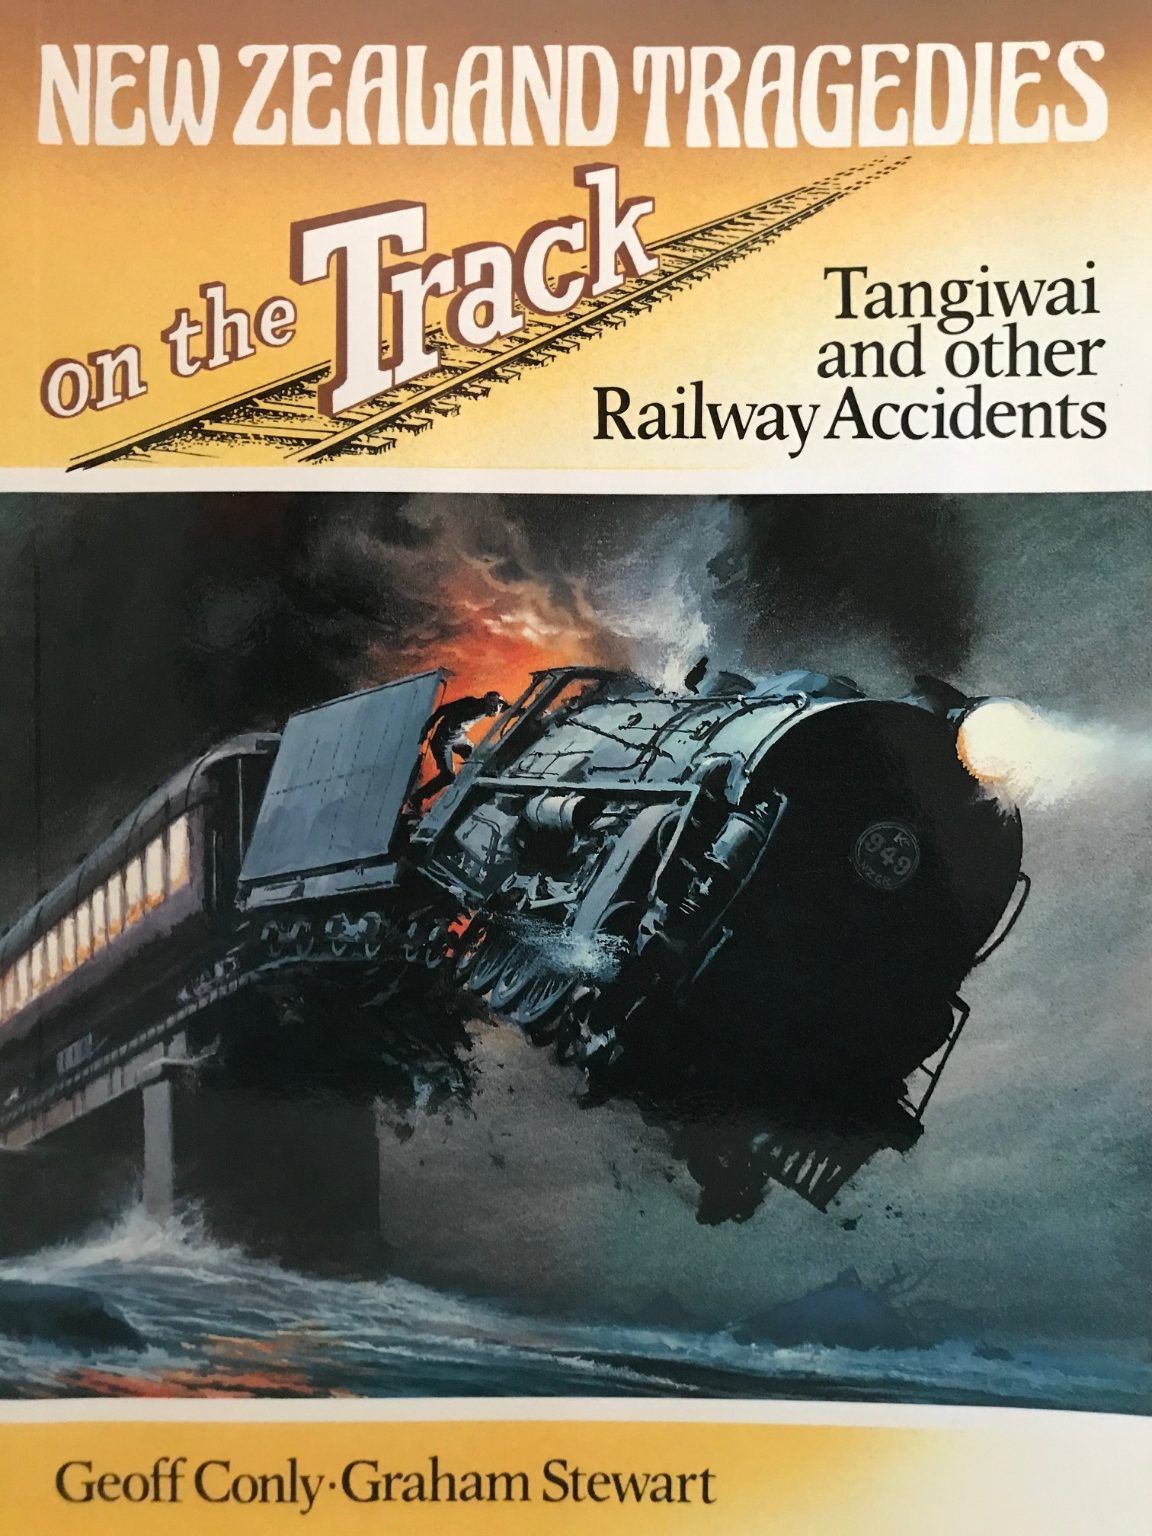 NEW ZEALAND TRAGEDIES ON THE TRACK: Tangiwai and other Railway Accidents